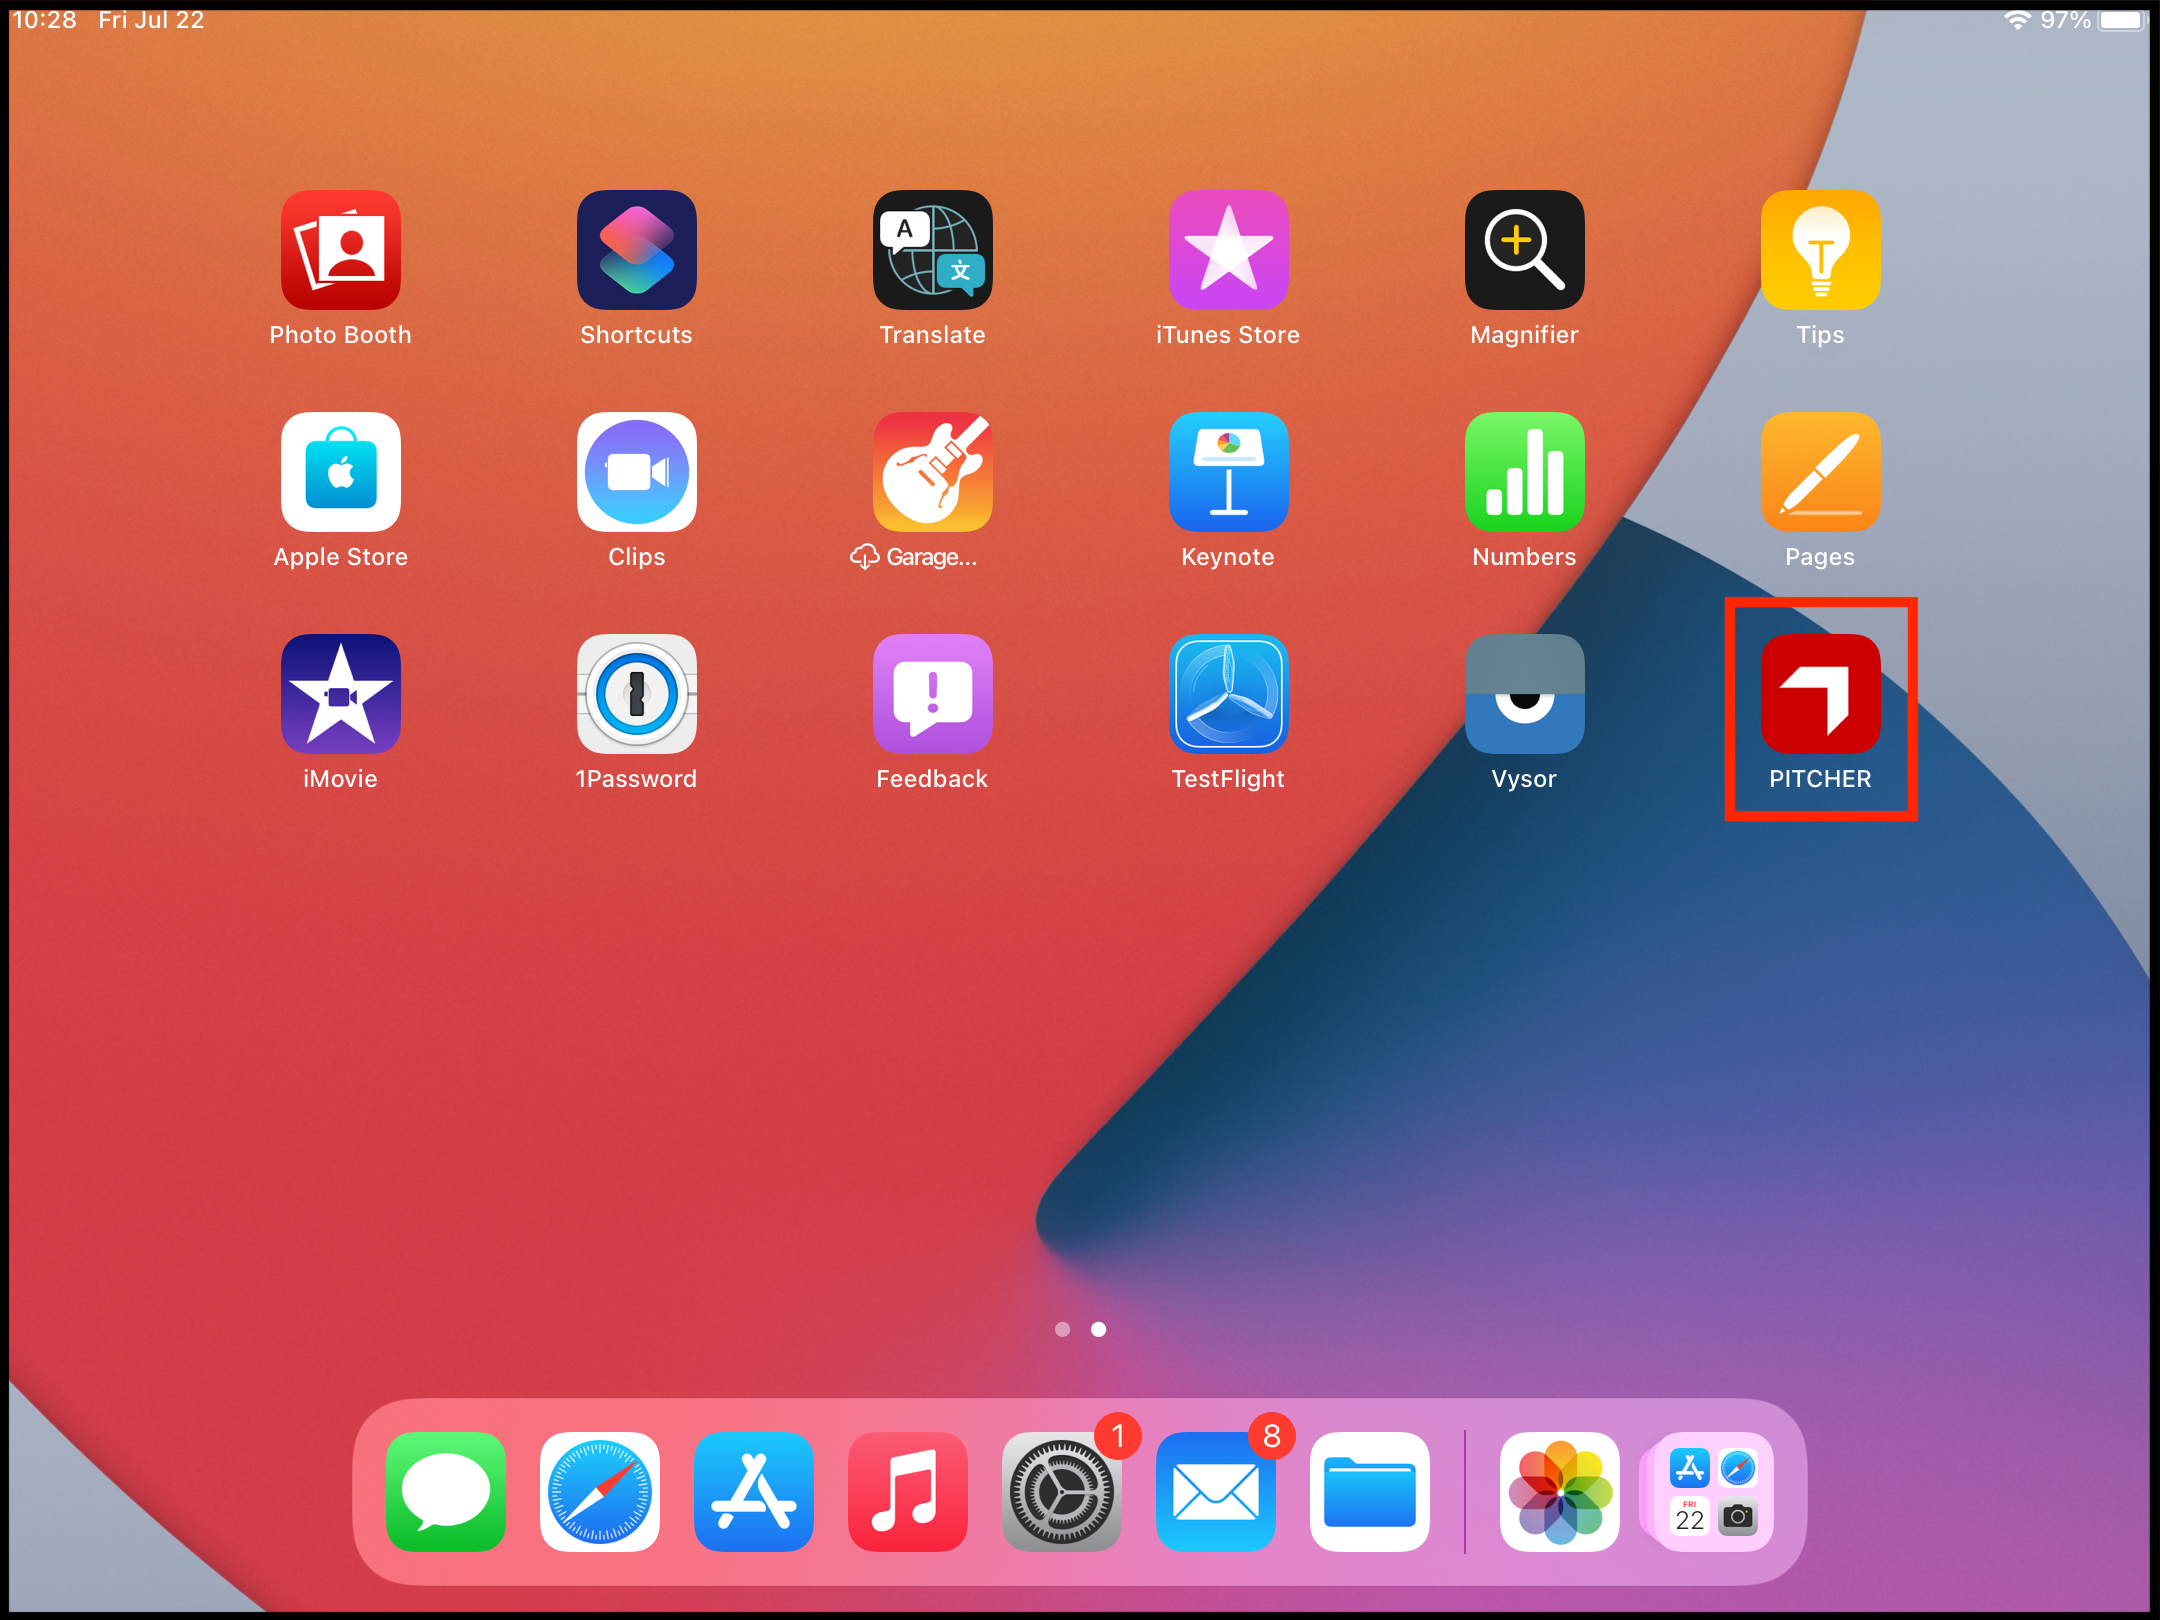 Application installed and shown in the home screen of the iPad